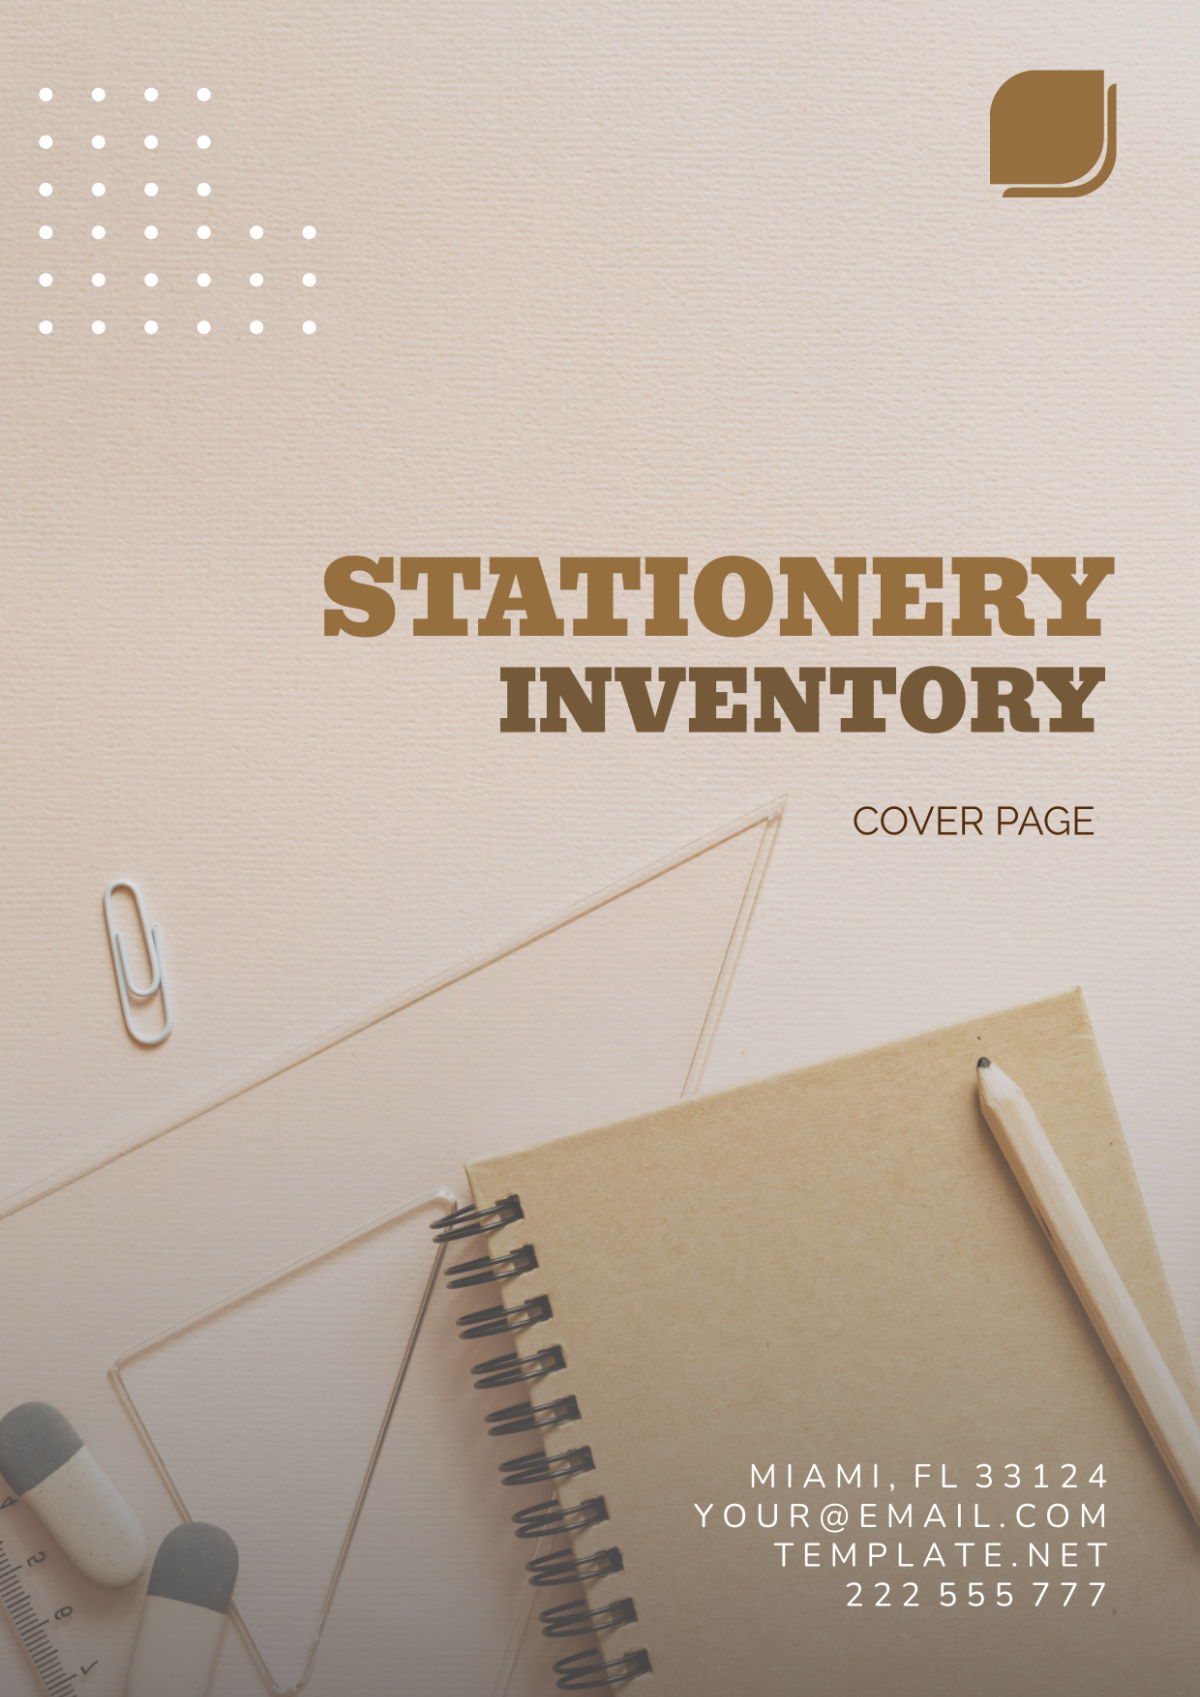 Stationery Inventory Cover Page